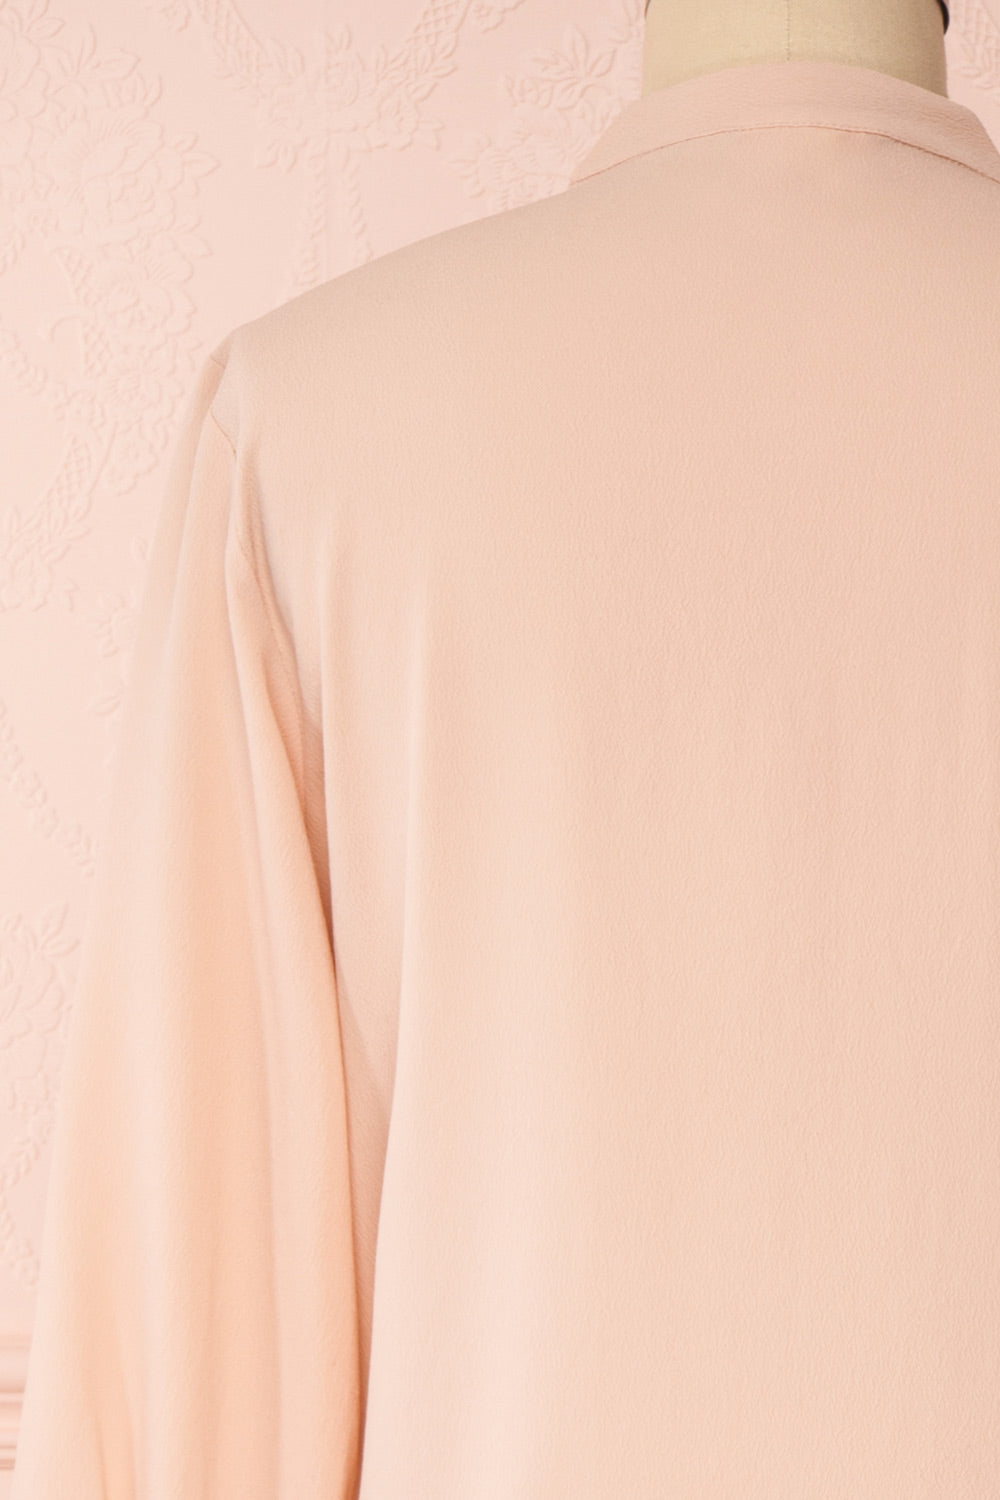 Lubien Dusty Rose Pink Long Sleeved Shirt | Boutique 1861 back close-up